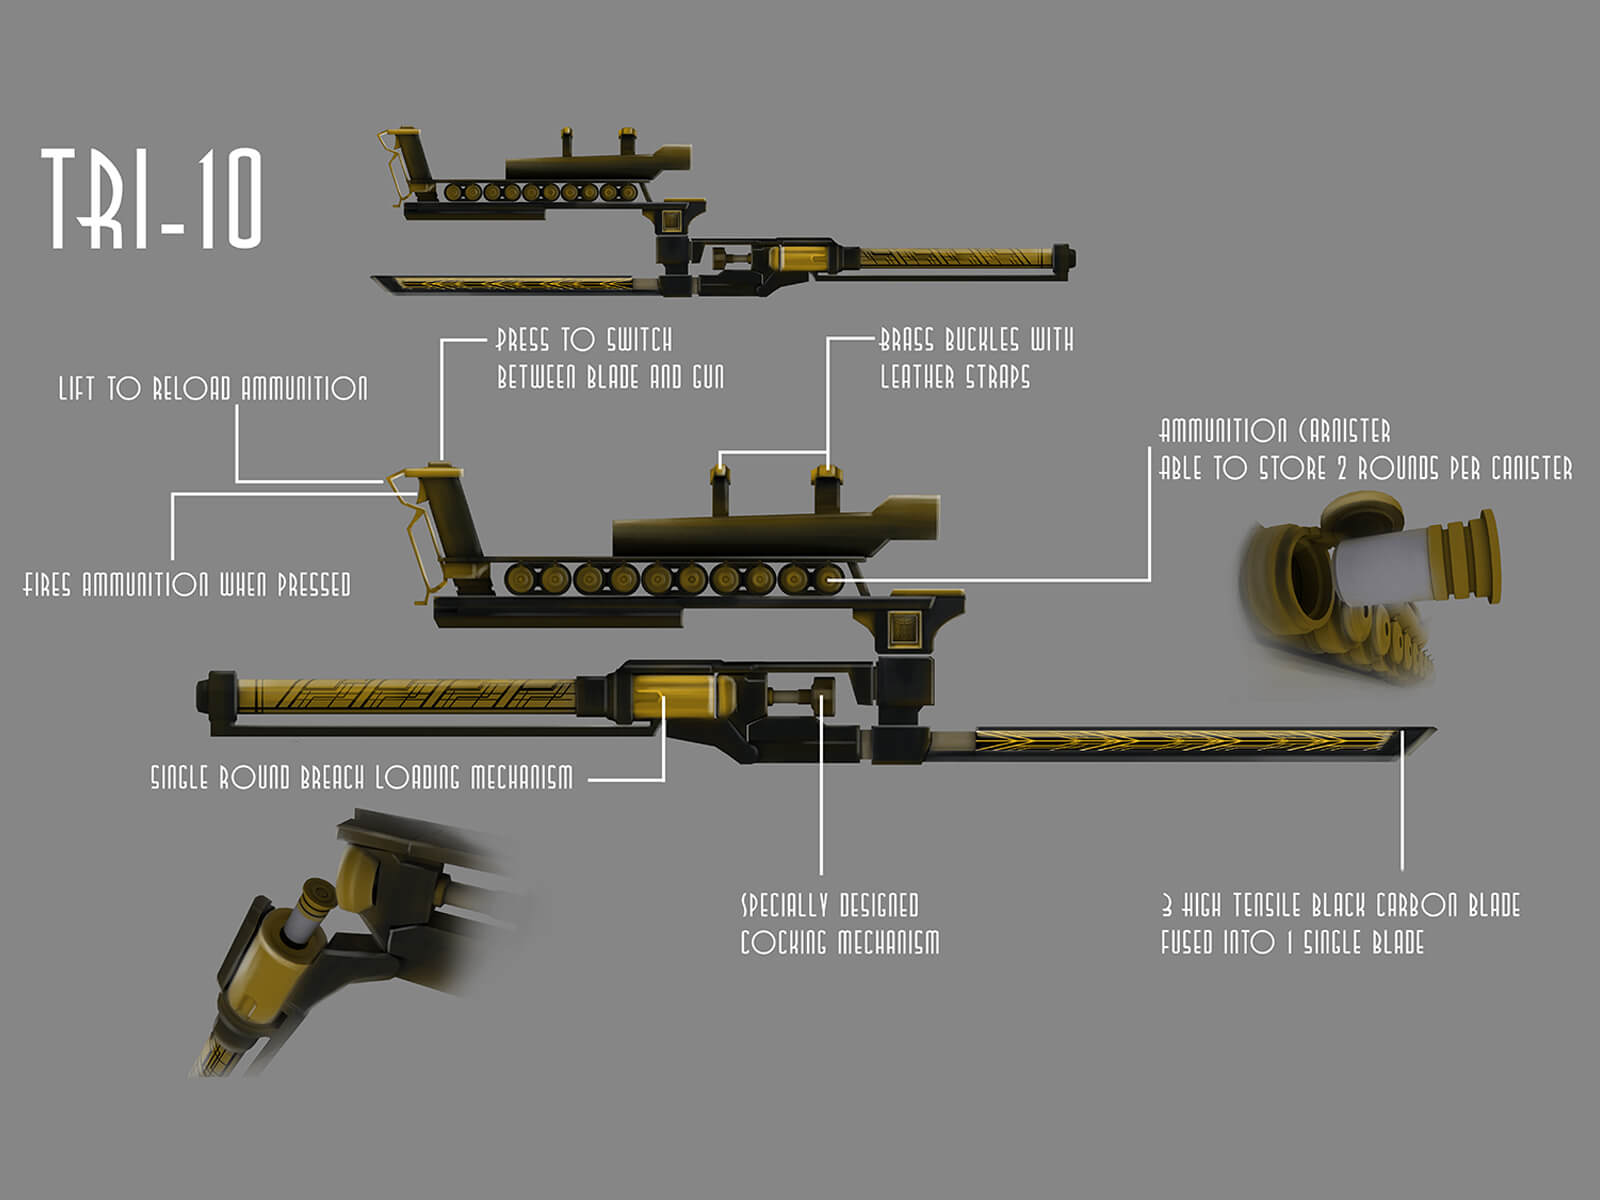 A gold-and-black-adorned, arm-held weapon with a blade, concealed gun barrel, and description of its various ammunition.